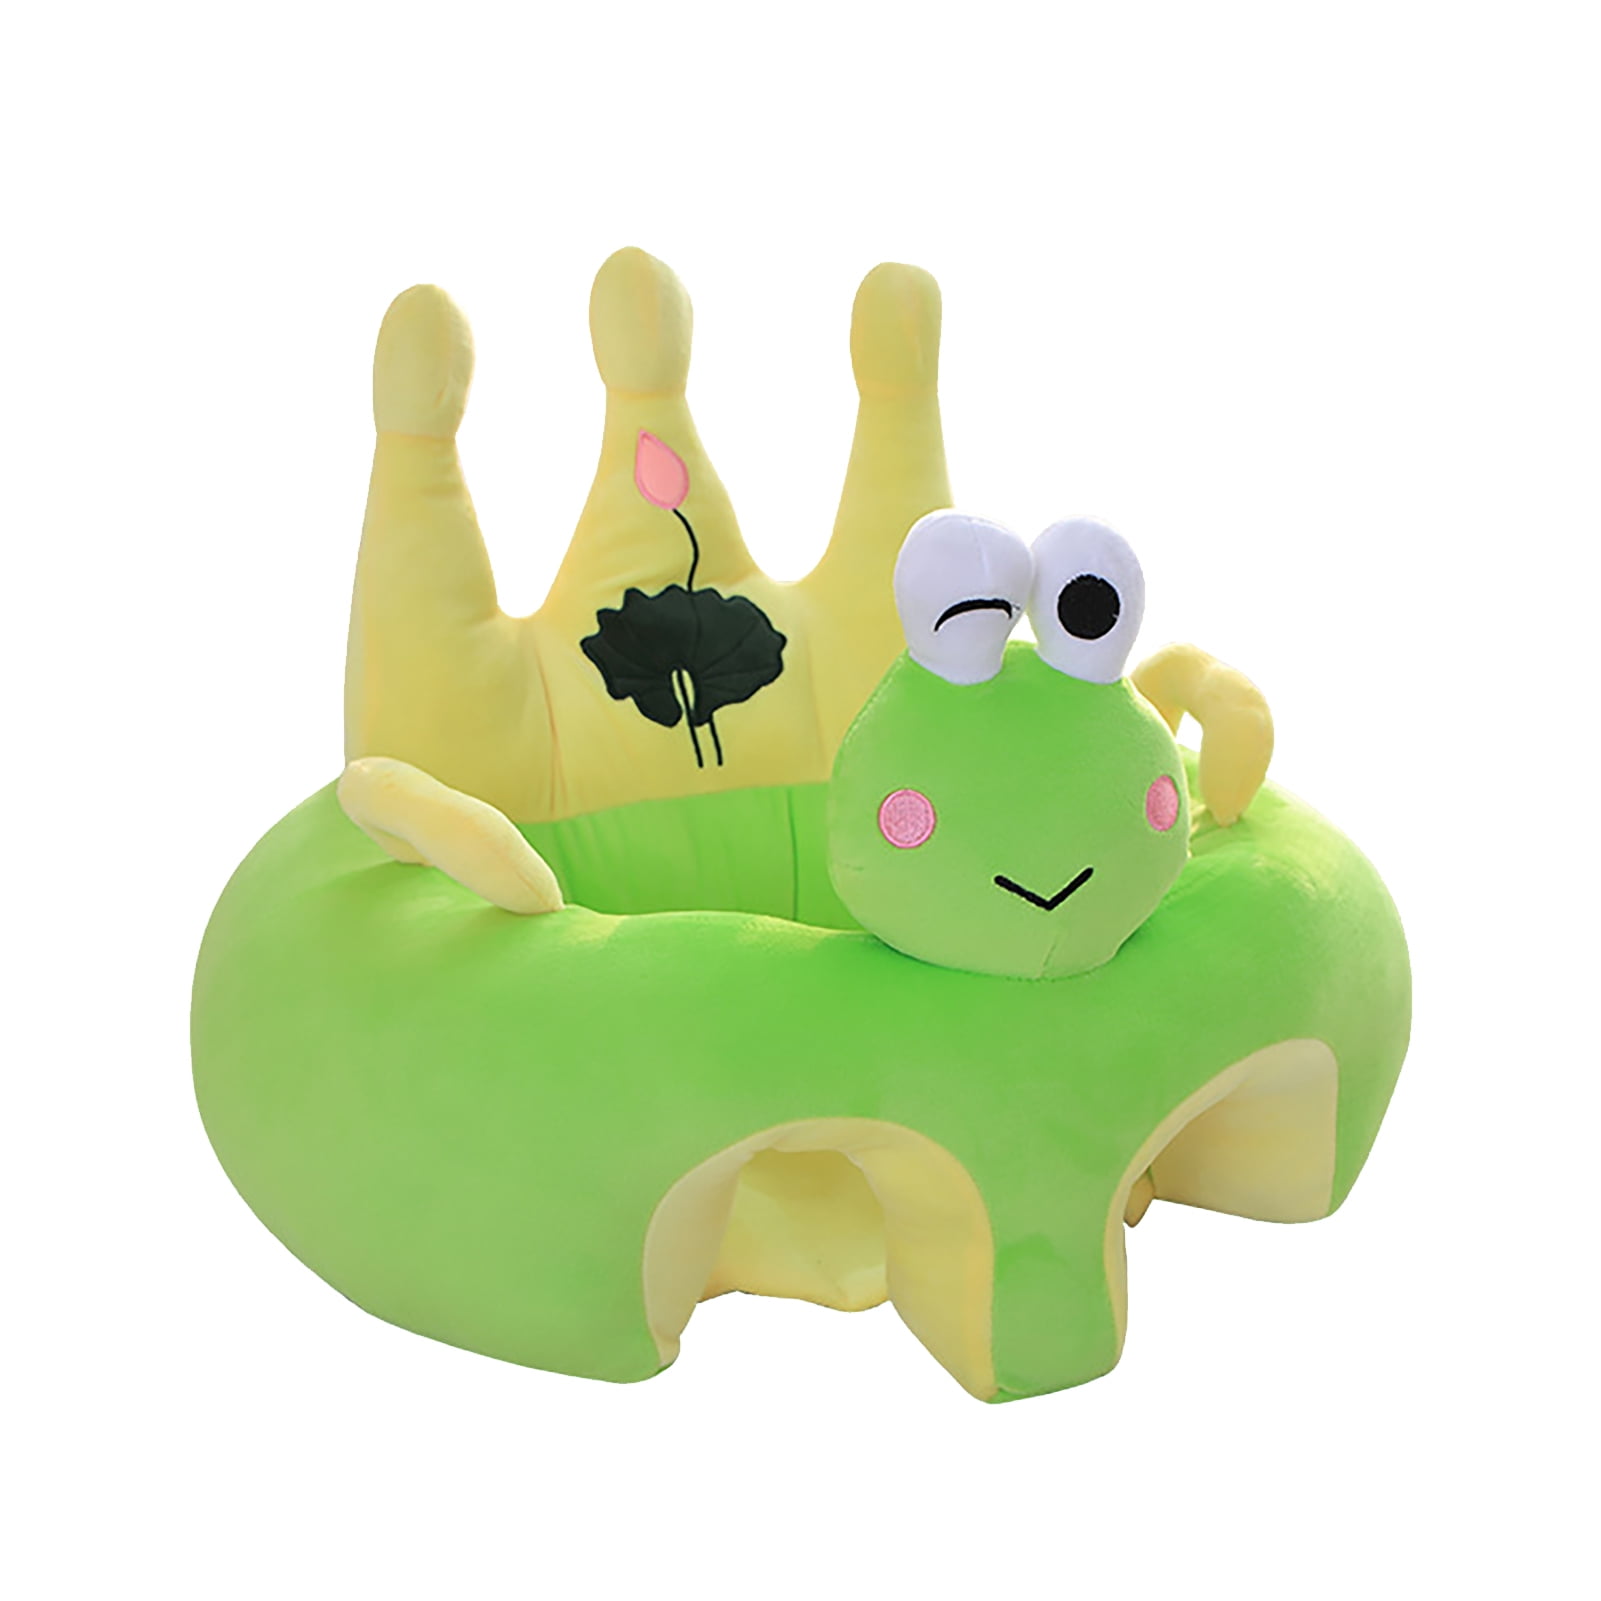 Baby Floor Support Seat Soft Plush Infant Learning to Sit Chair